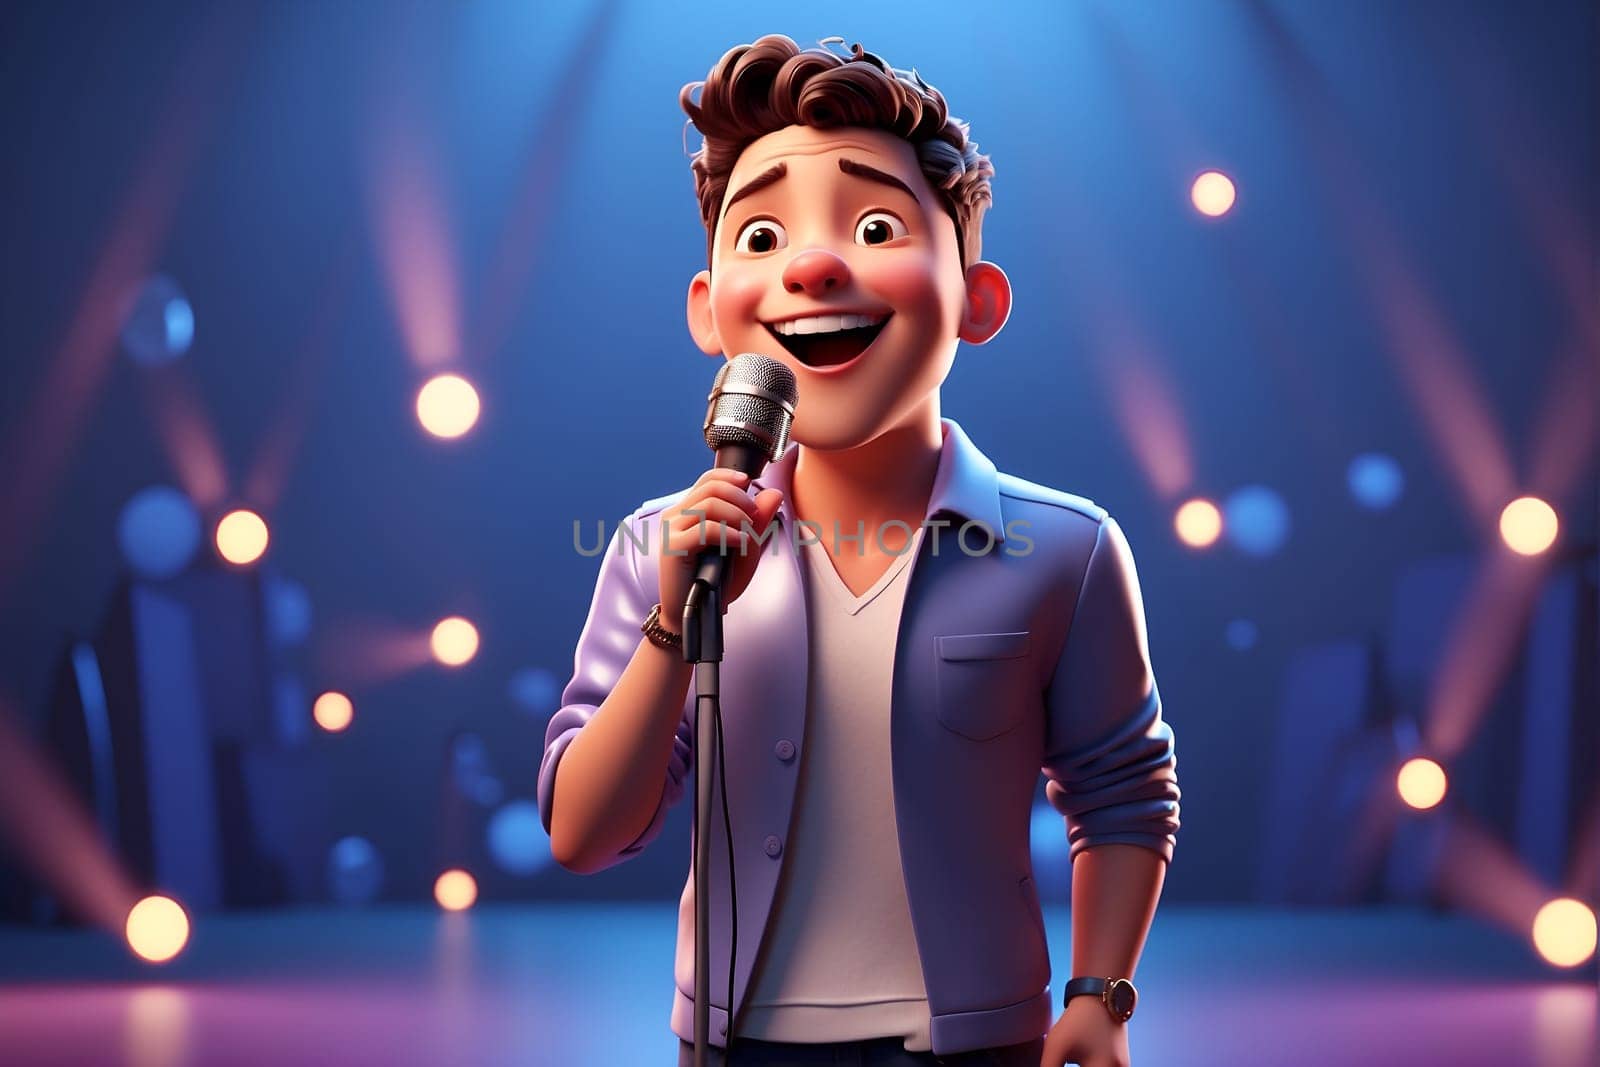 A cute cartoon character stands on a stage, confidently holding a microphone in hand.